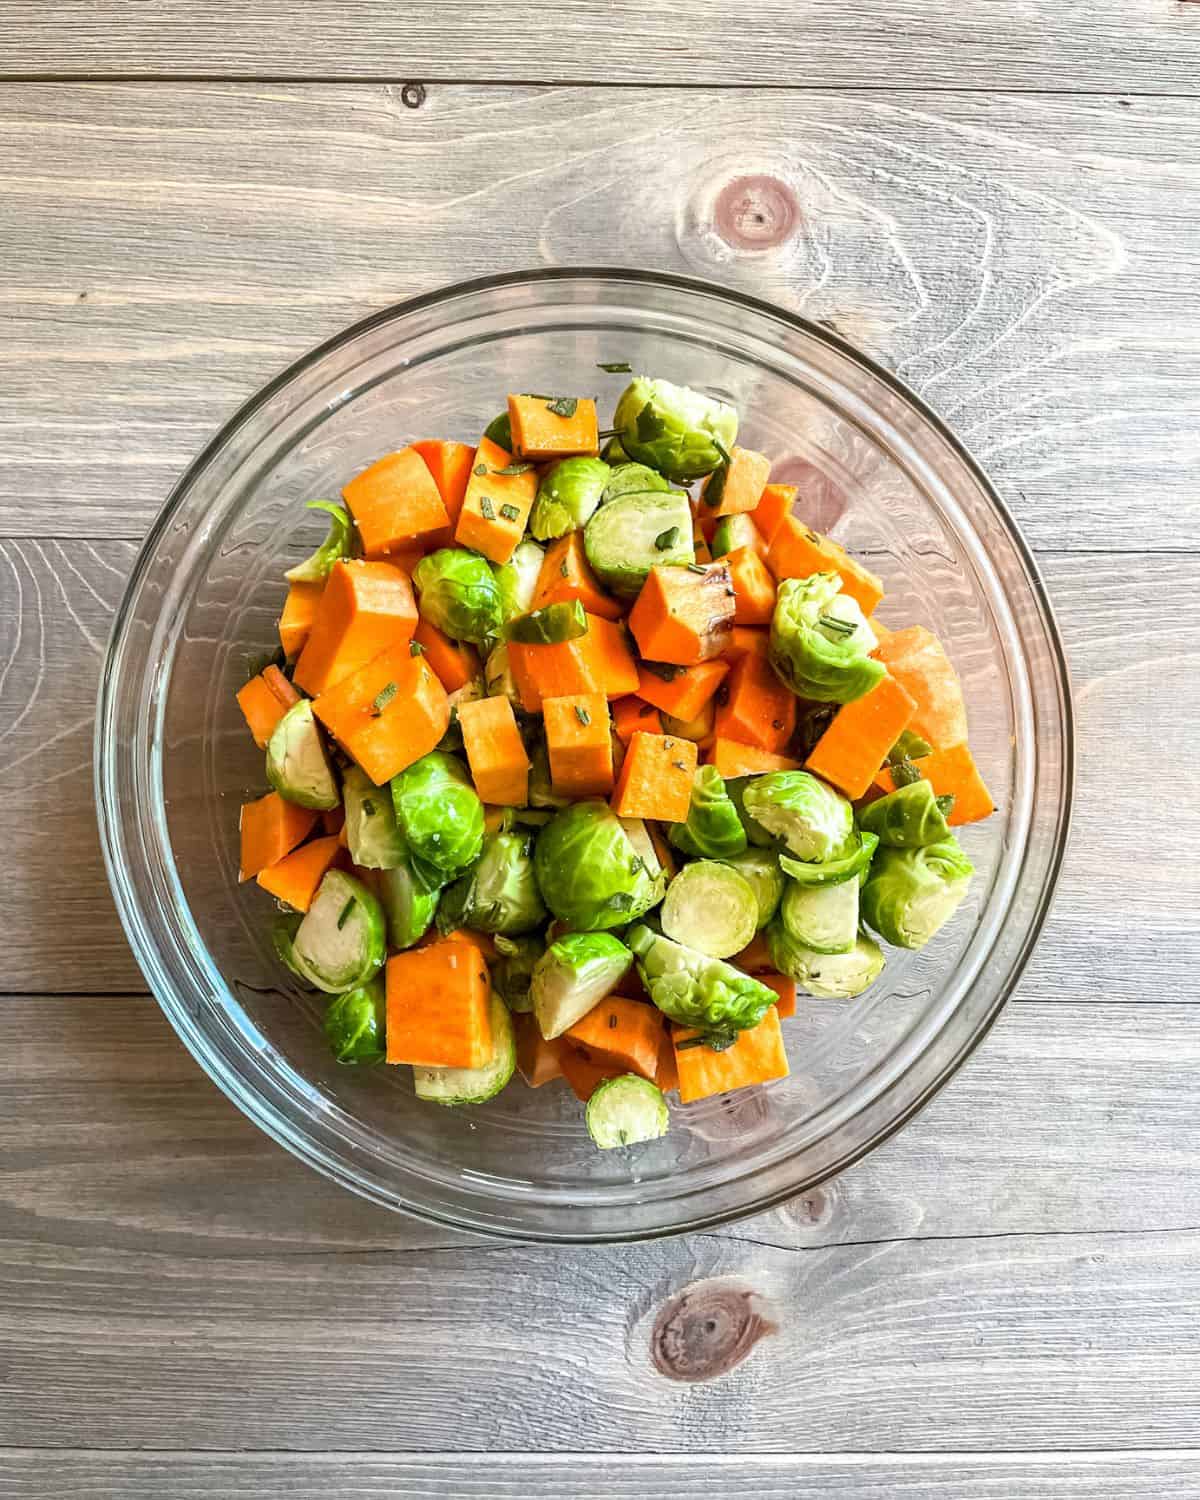 Sweet potatoes, brussel sprouts, fresh herbs and olive oil mixed in a glass bowl.